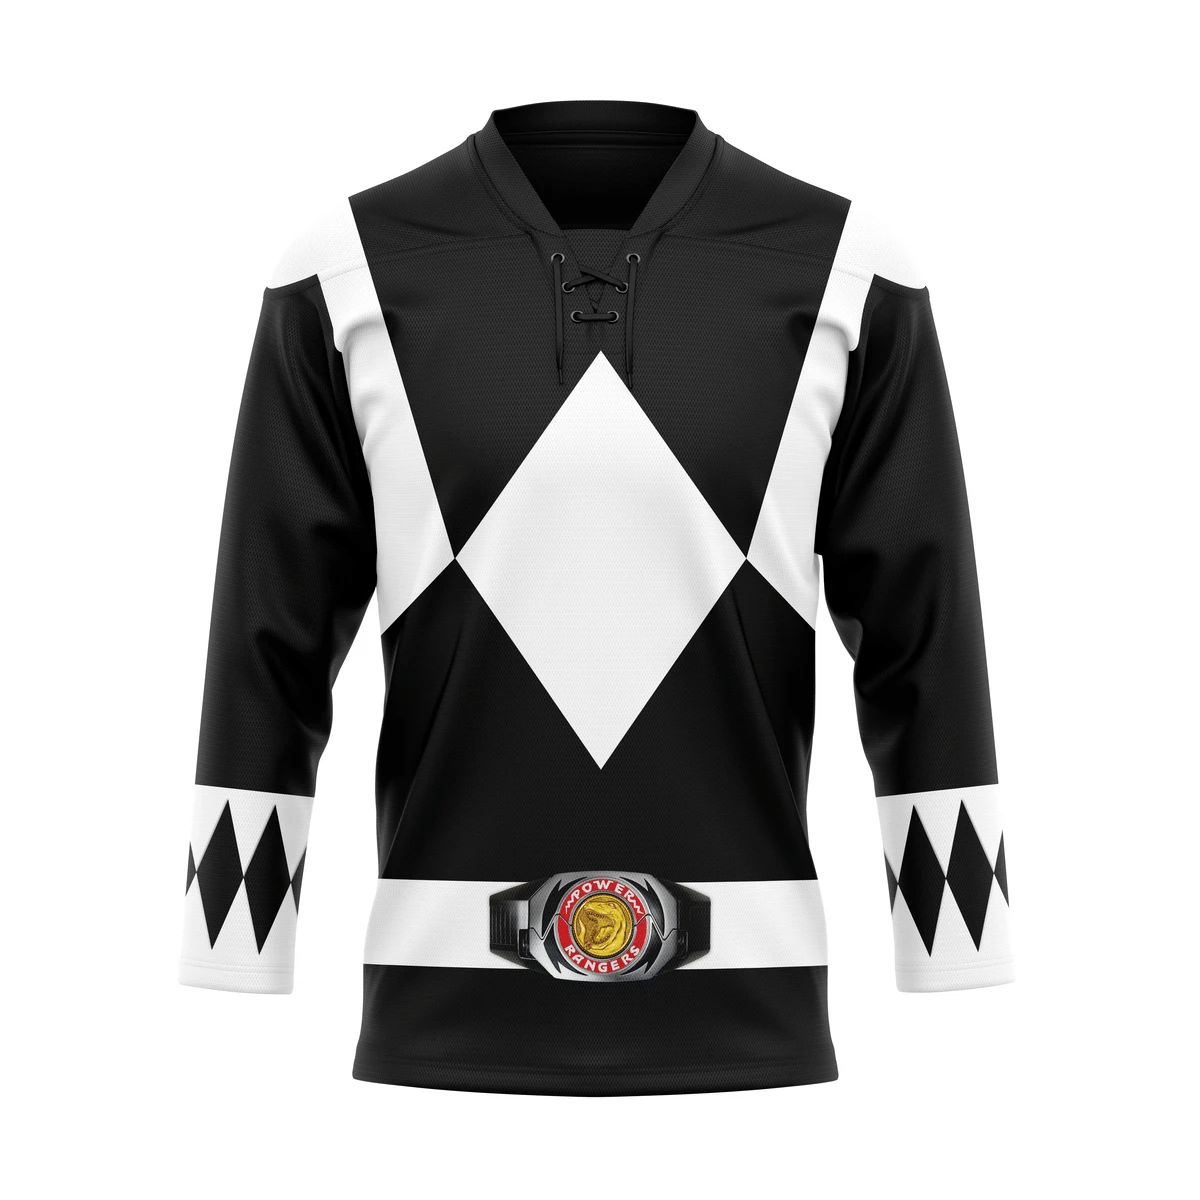 Top hot hockey jersey for NHL fans You can find out more at the bottom of the page! 54